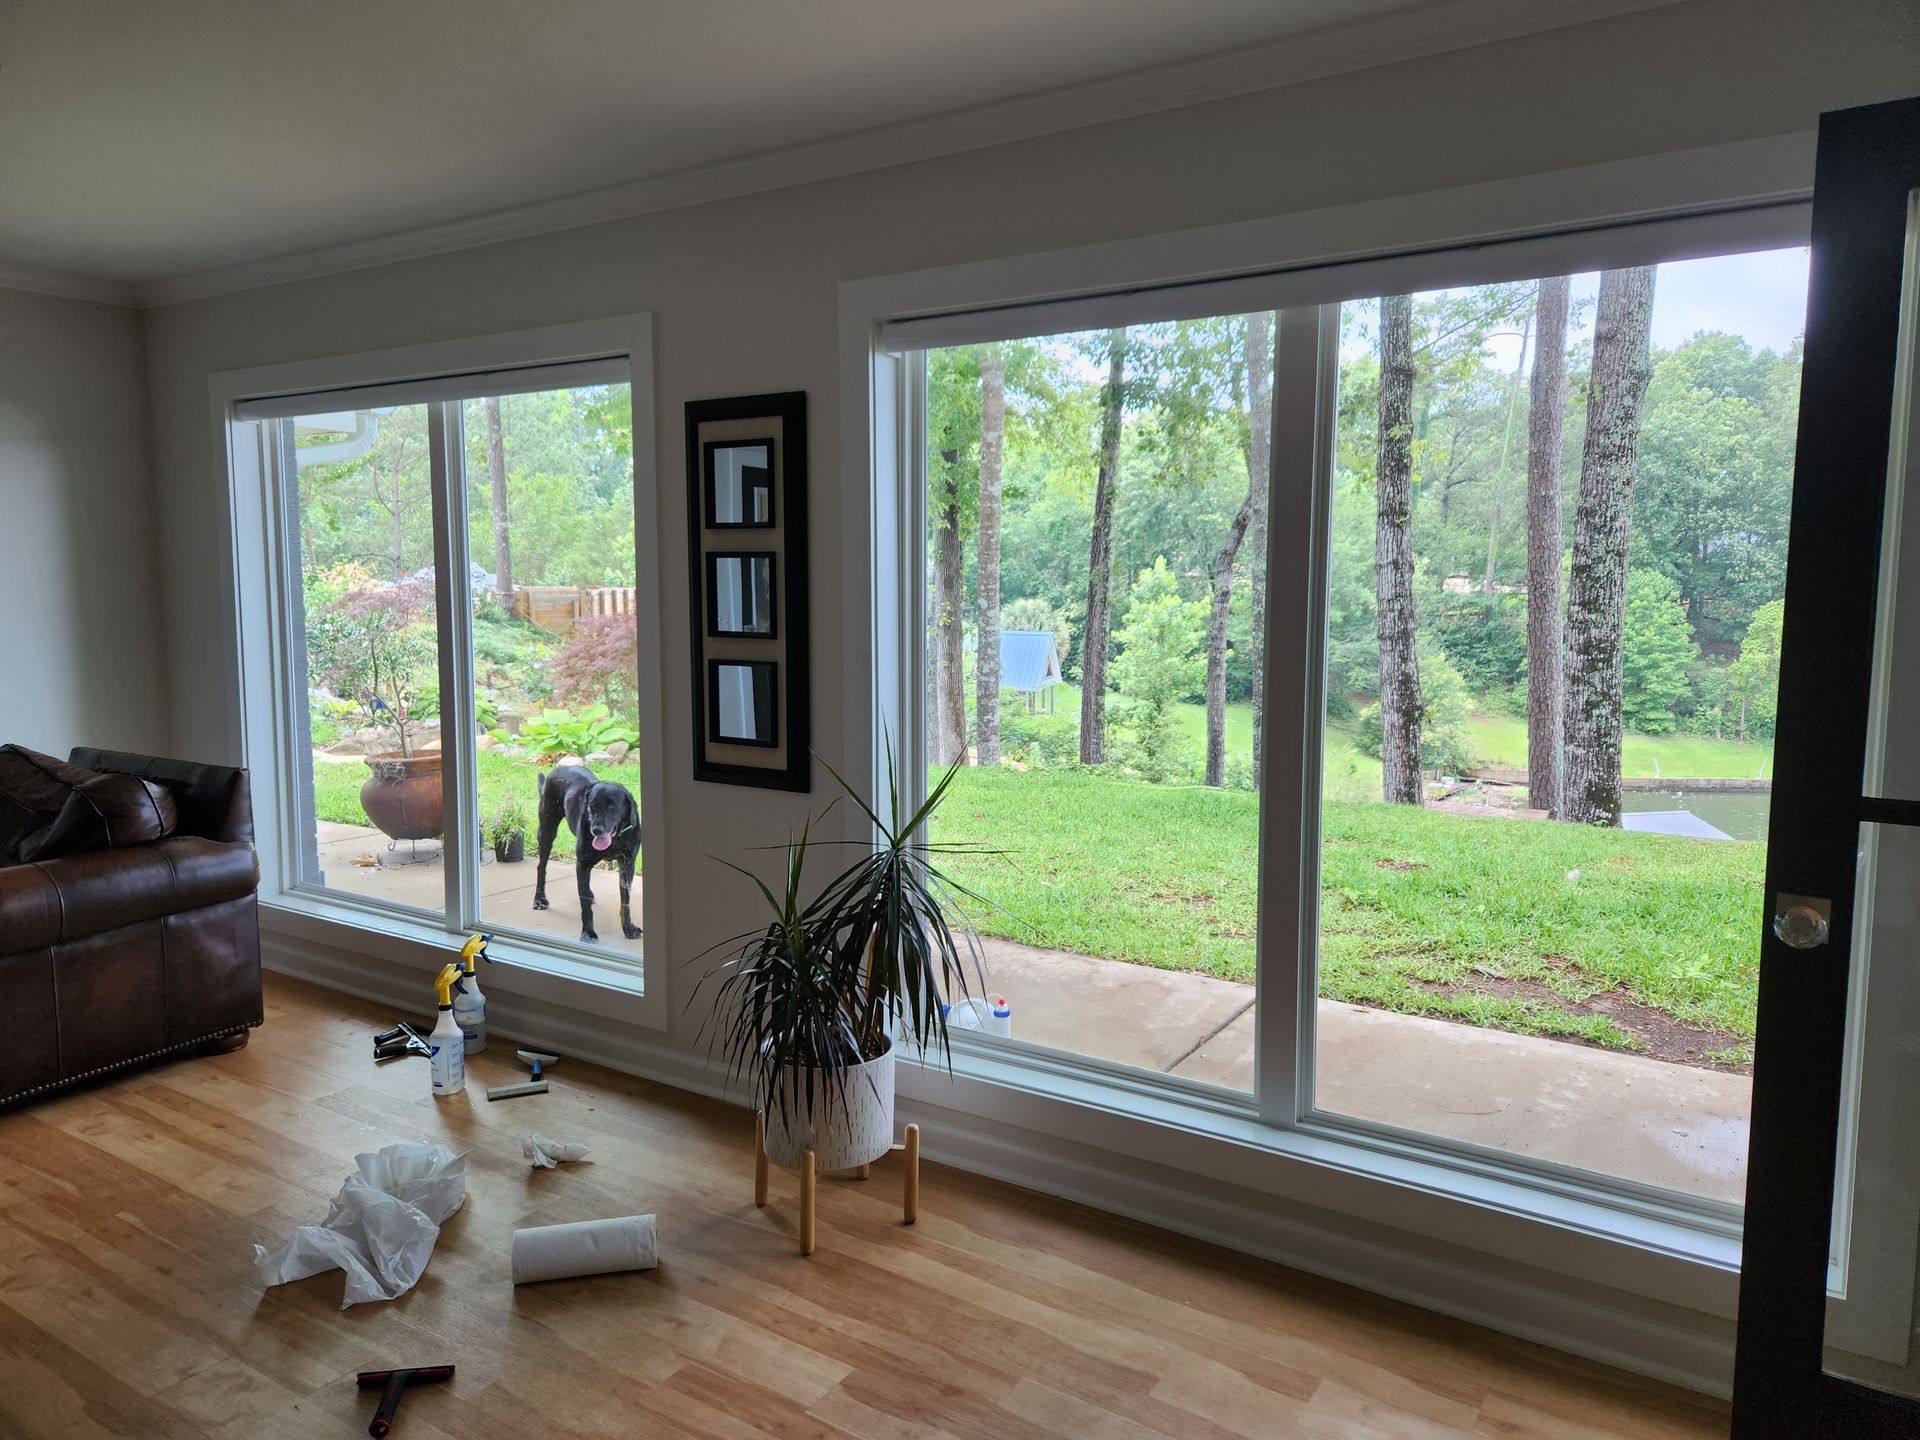 home tint - SPF Performance Dim Crystal residential tint keeps the natural light and color without heat or bright Sun glare that came in with it. Deatsville AL